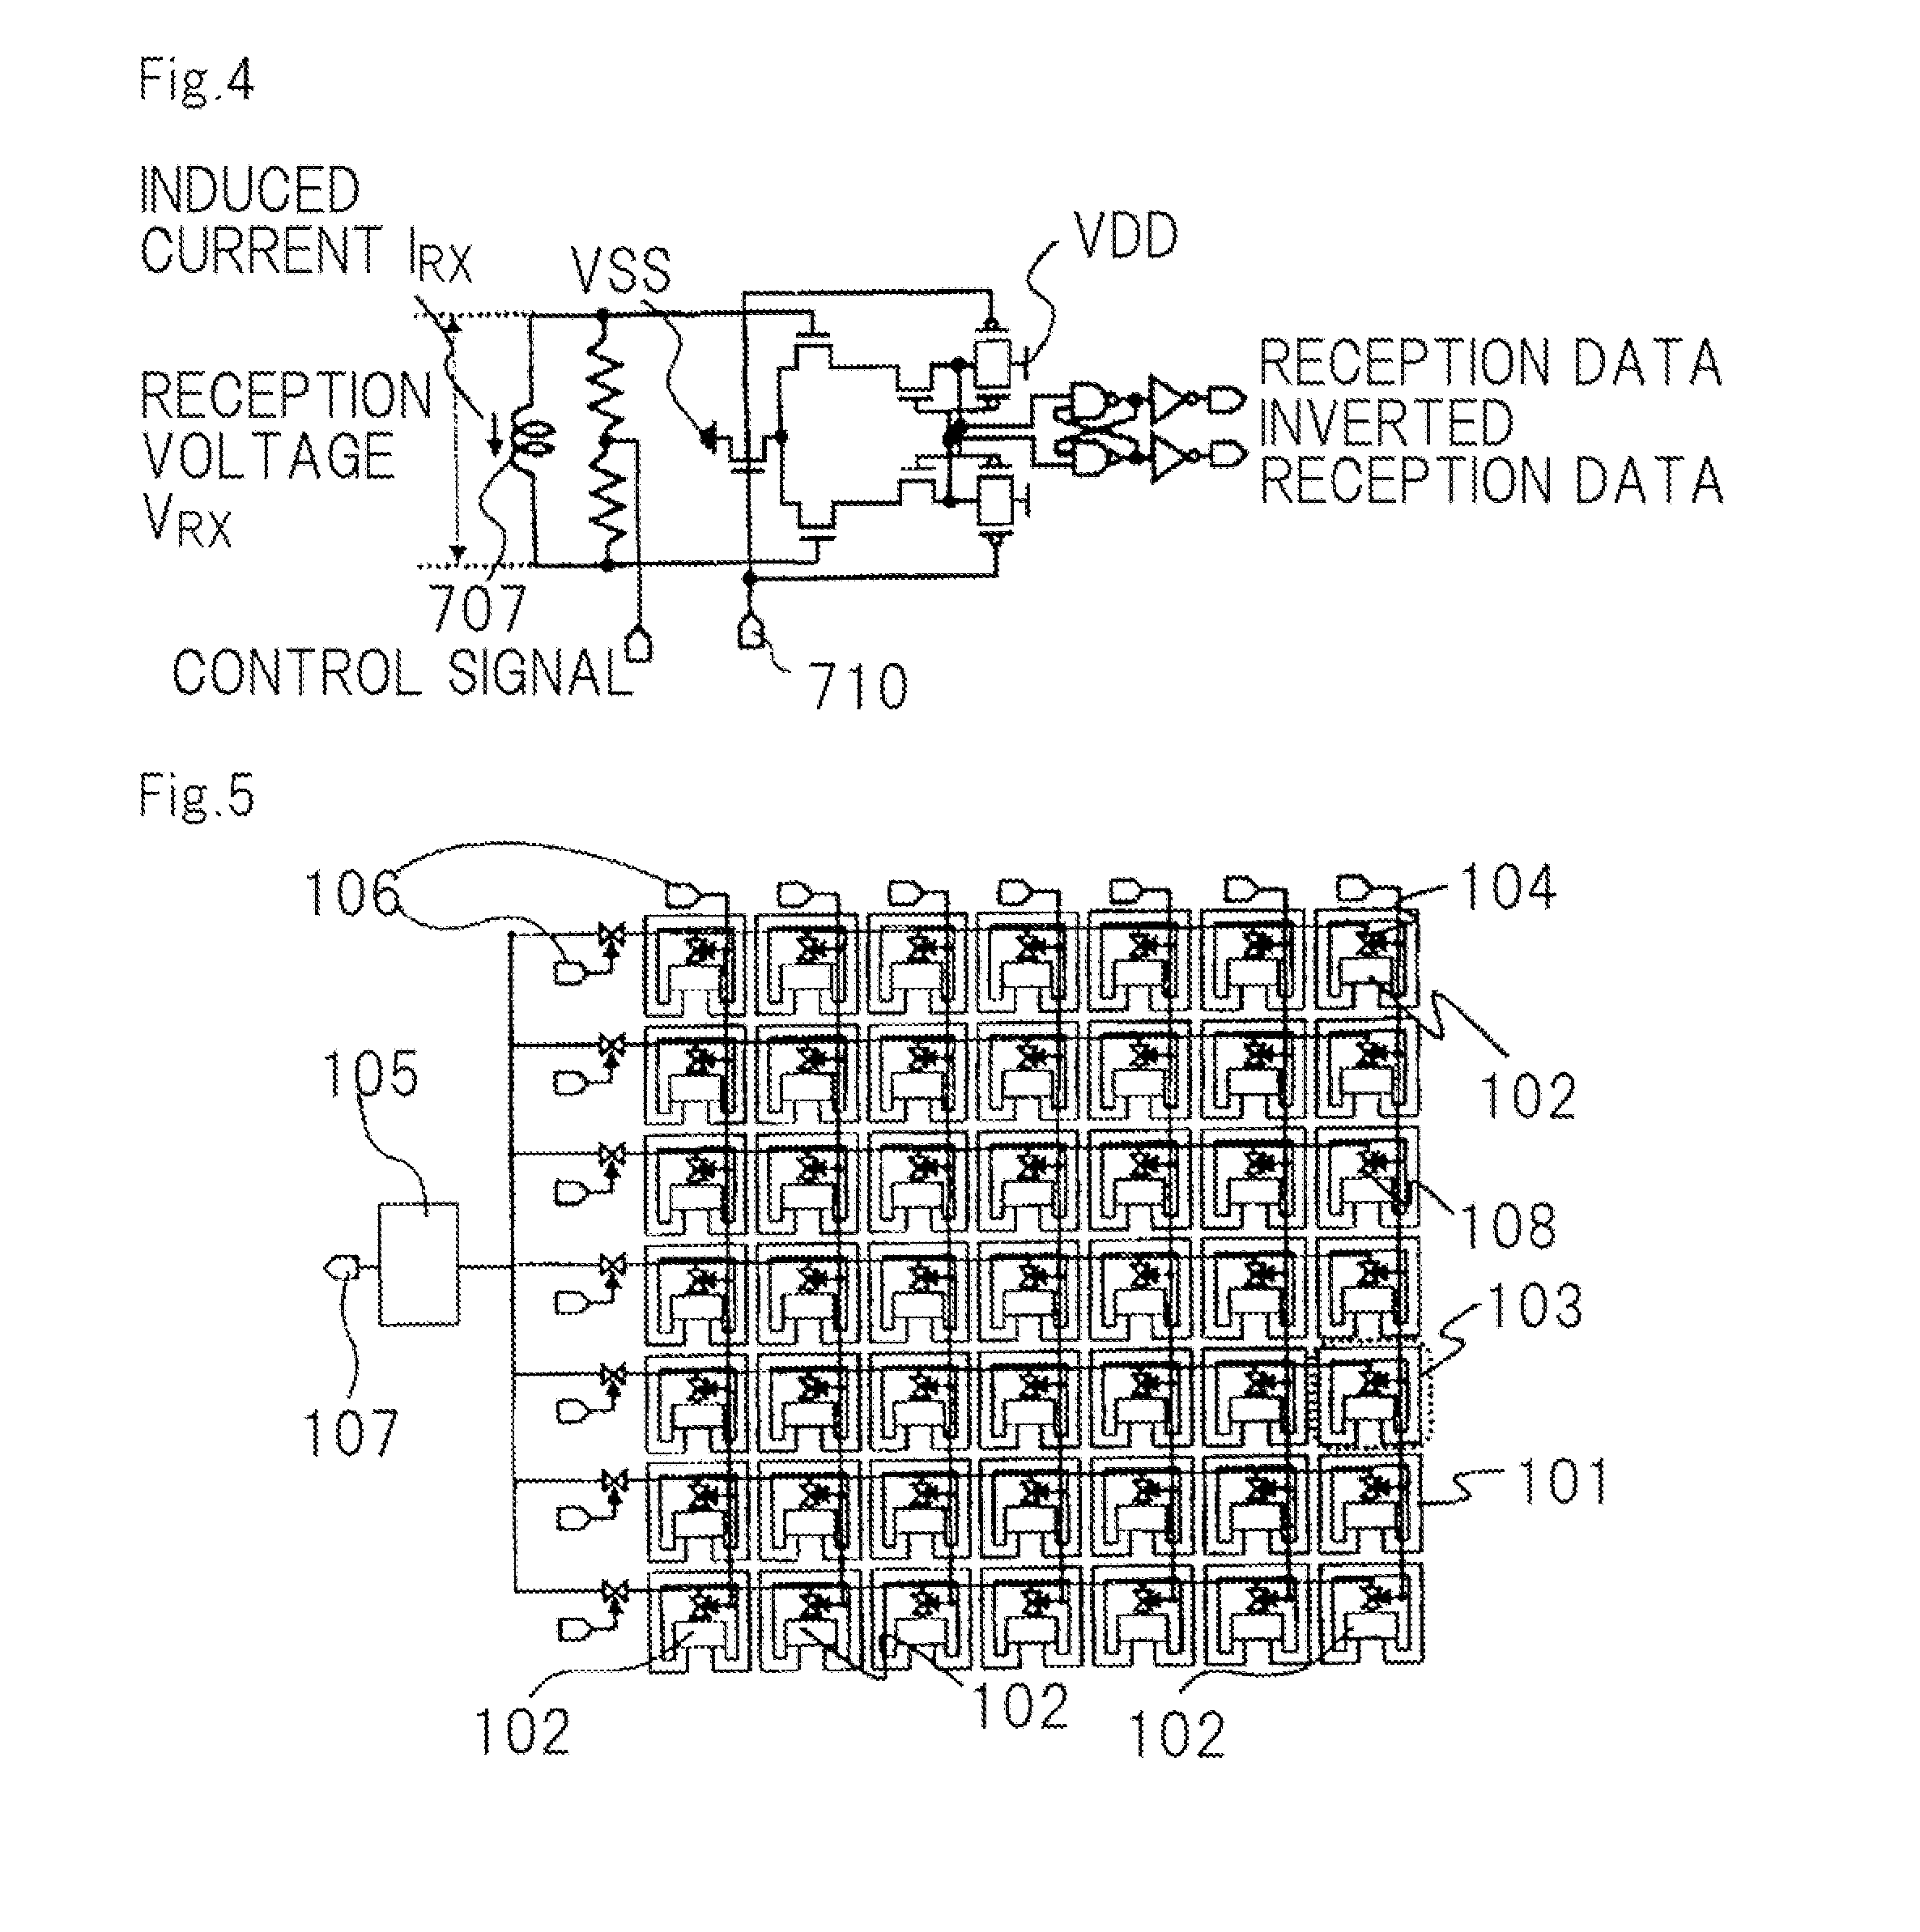 Semiconductor device performing signal transmission by using inductor coupling